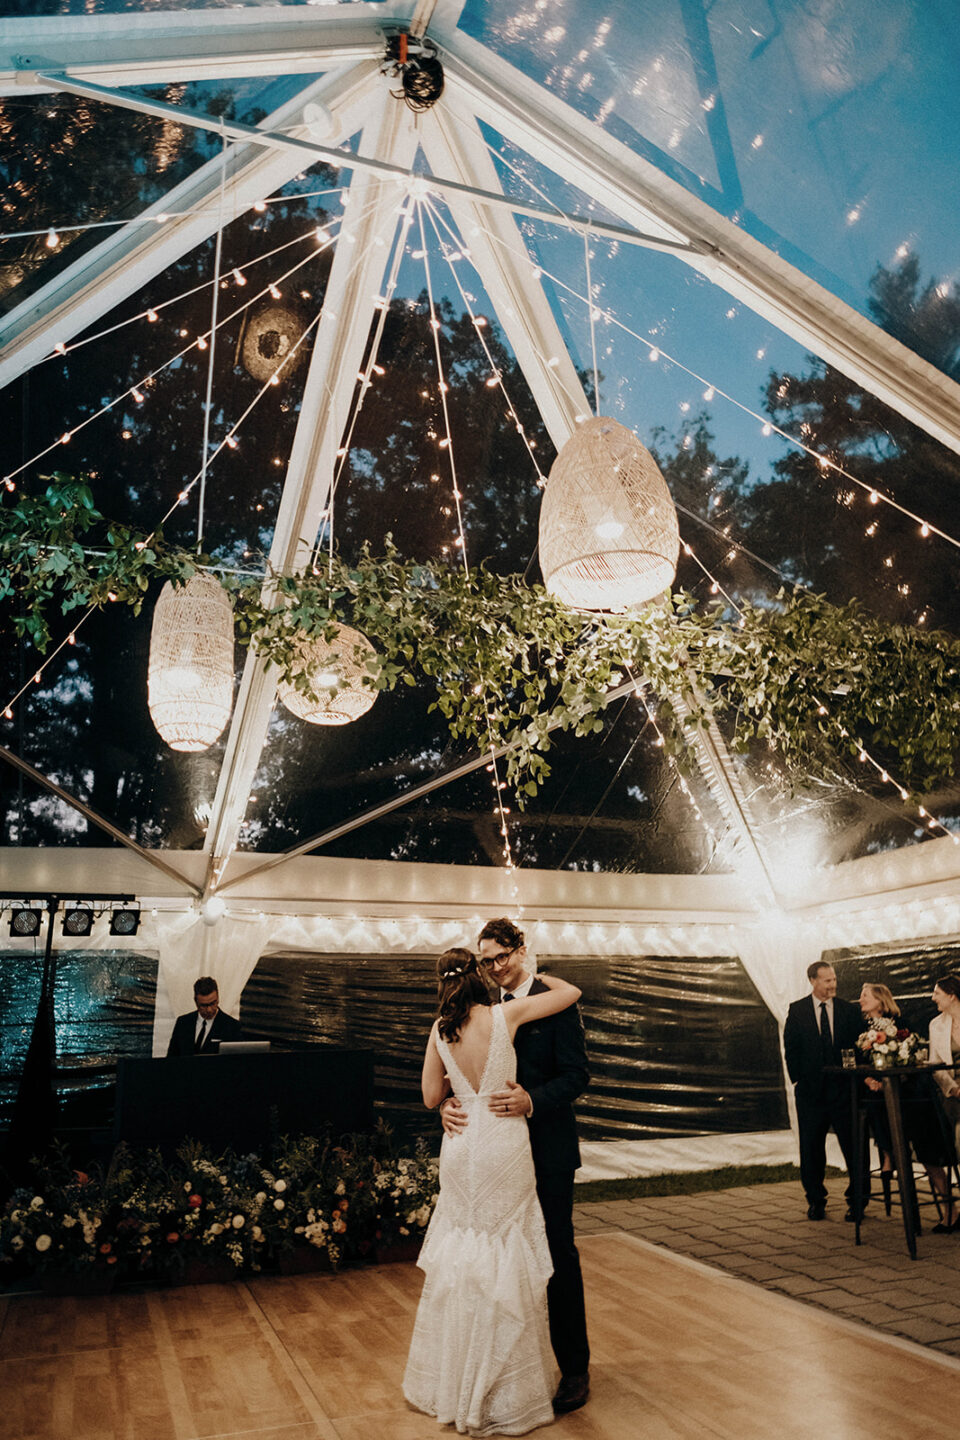 newlyweds have first dance under clear top tent with twinkle lights at night.